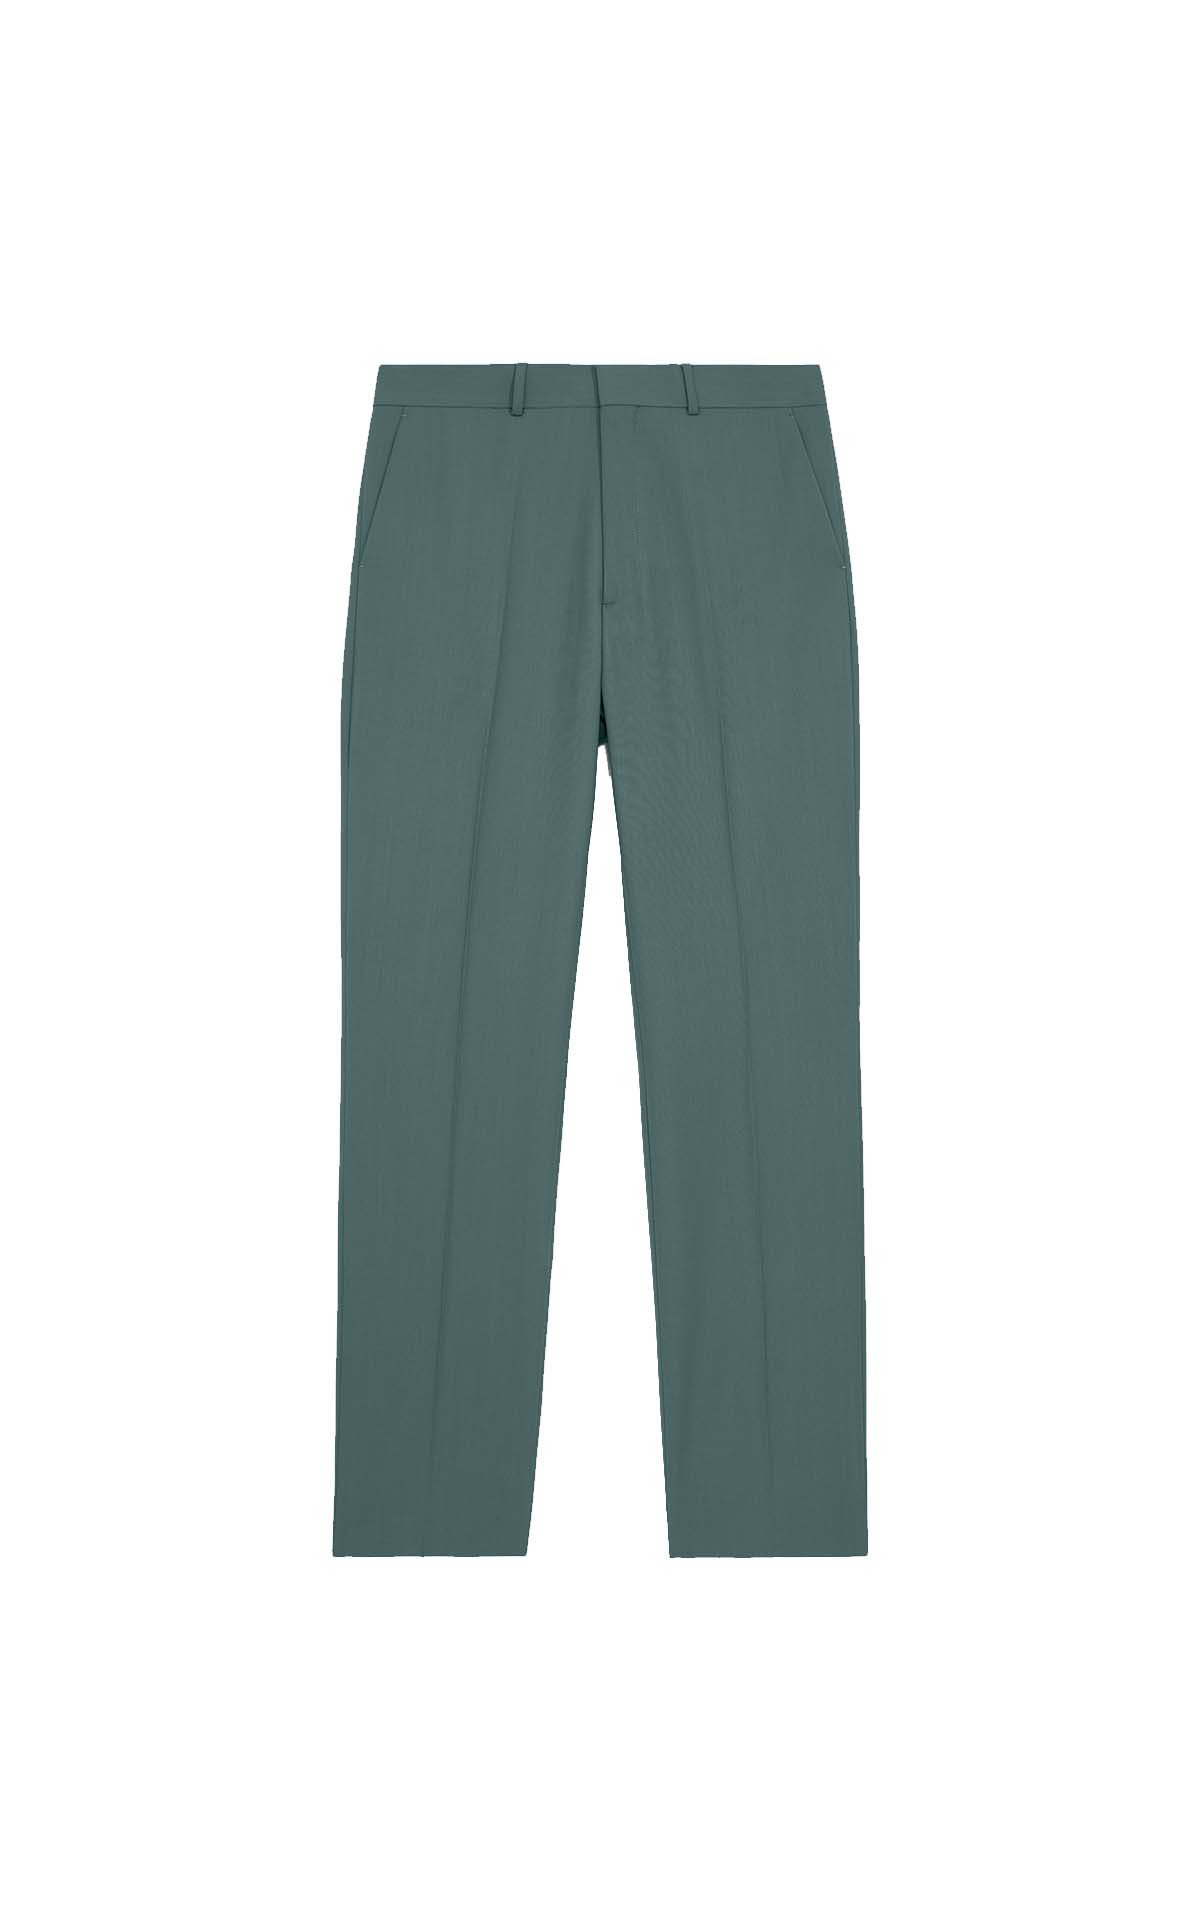 Turquoise blue suit trousers